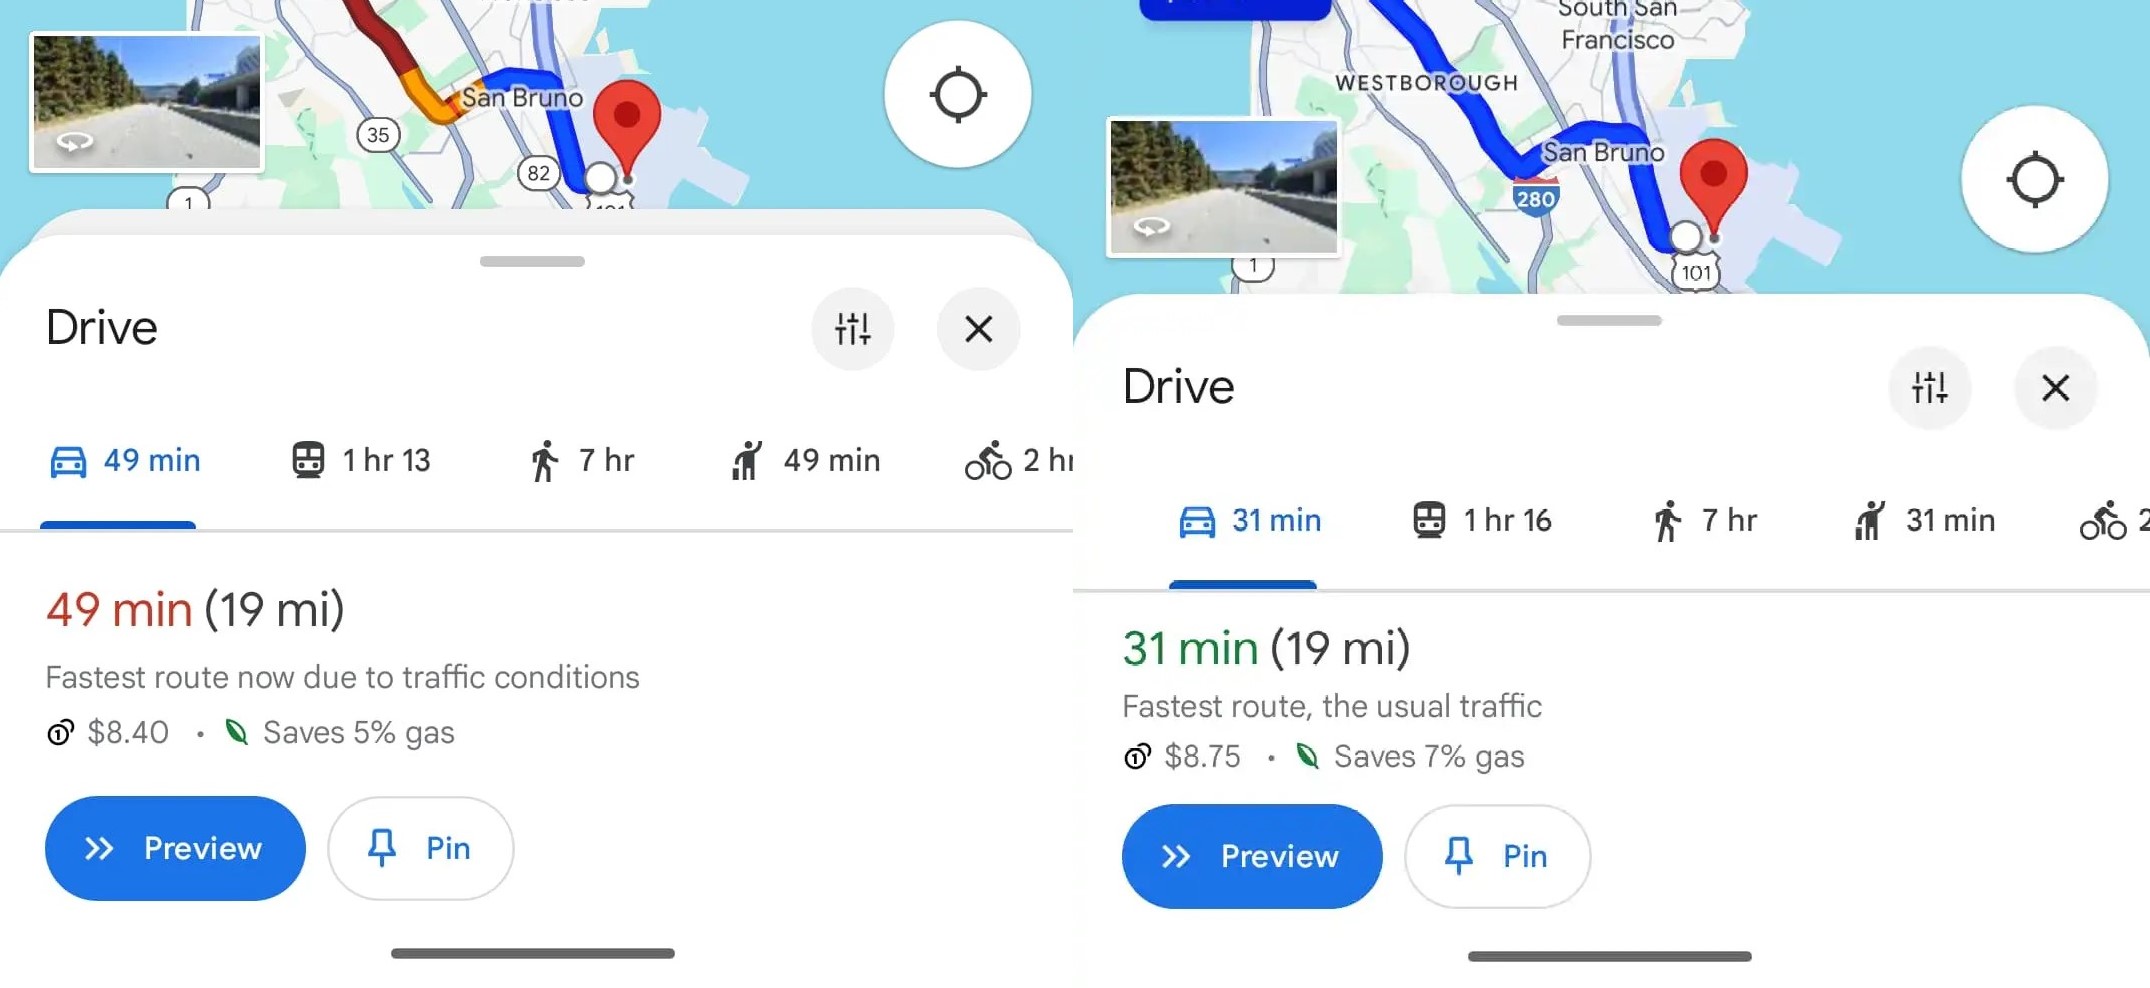 The Google Maps user interface is changing